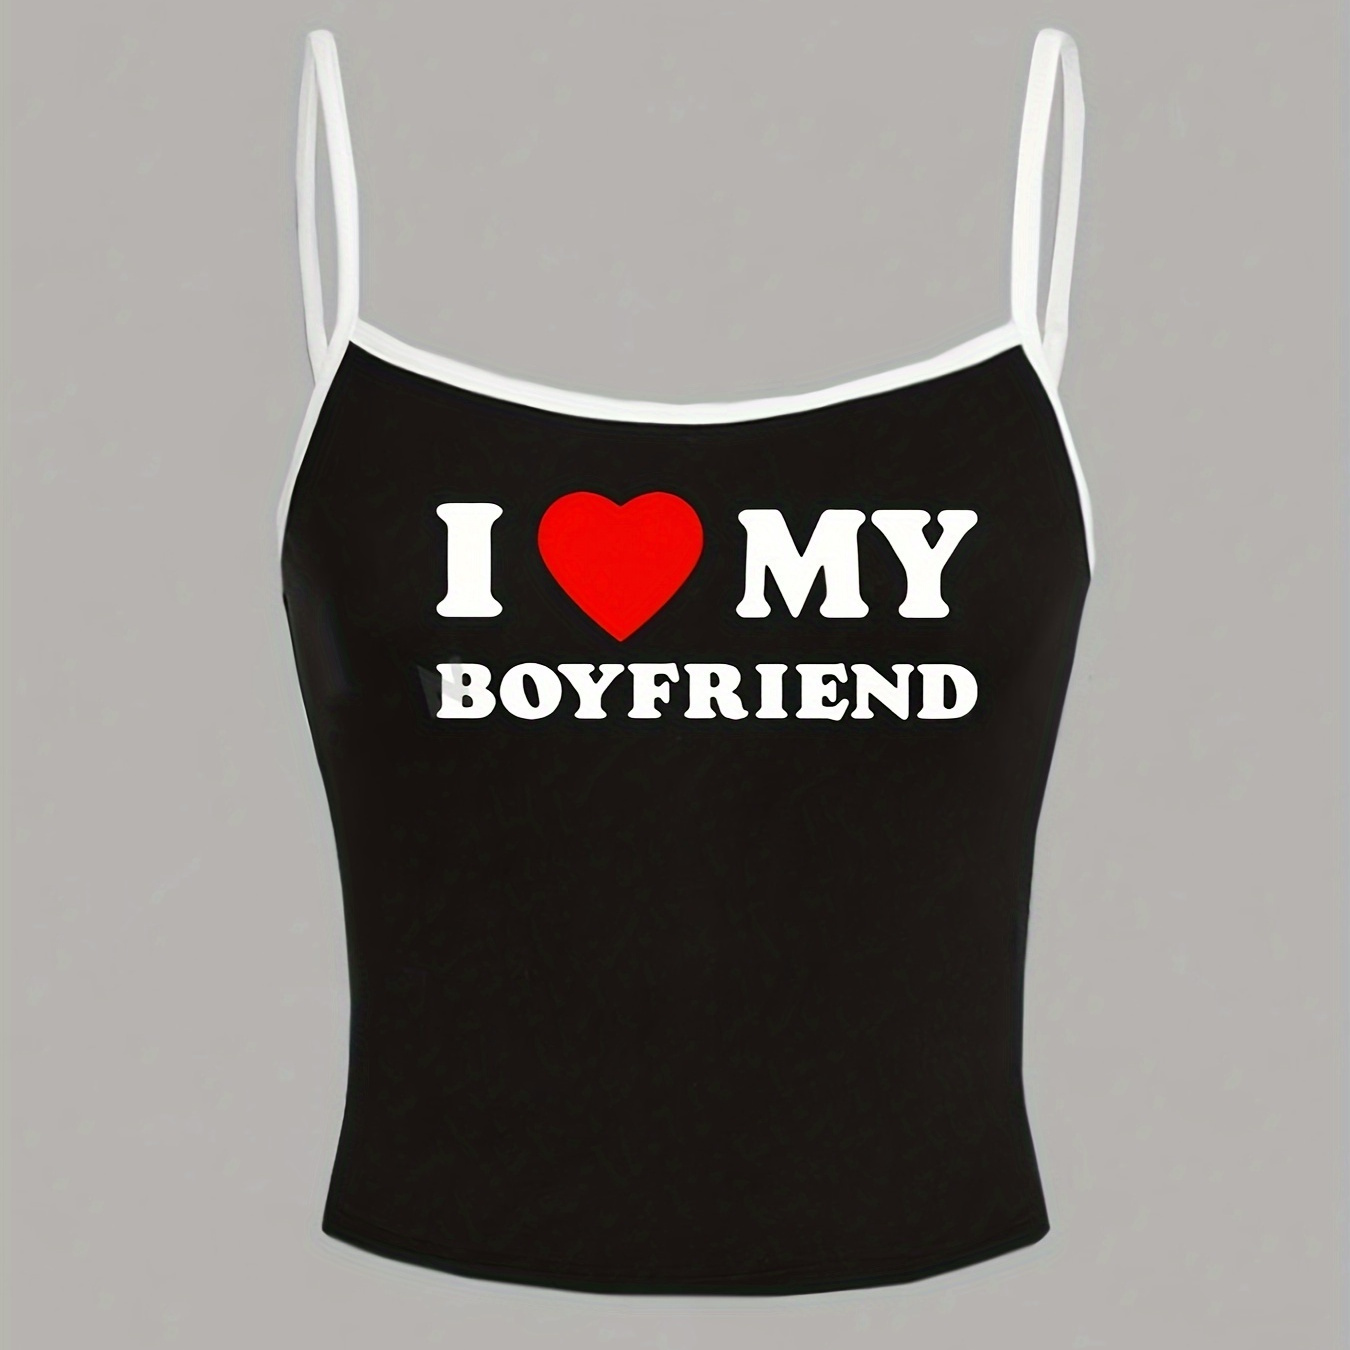 

I Love My Boyfriend Print Cami Top, Casual Sleeveless Cami Top For Summer, Women's Clothing